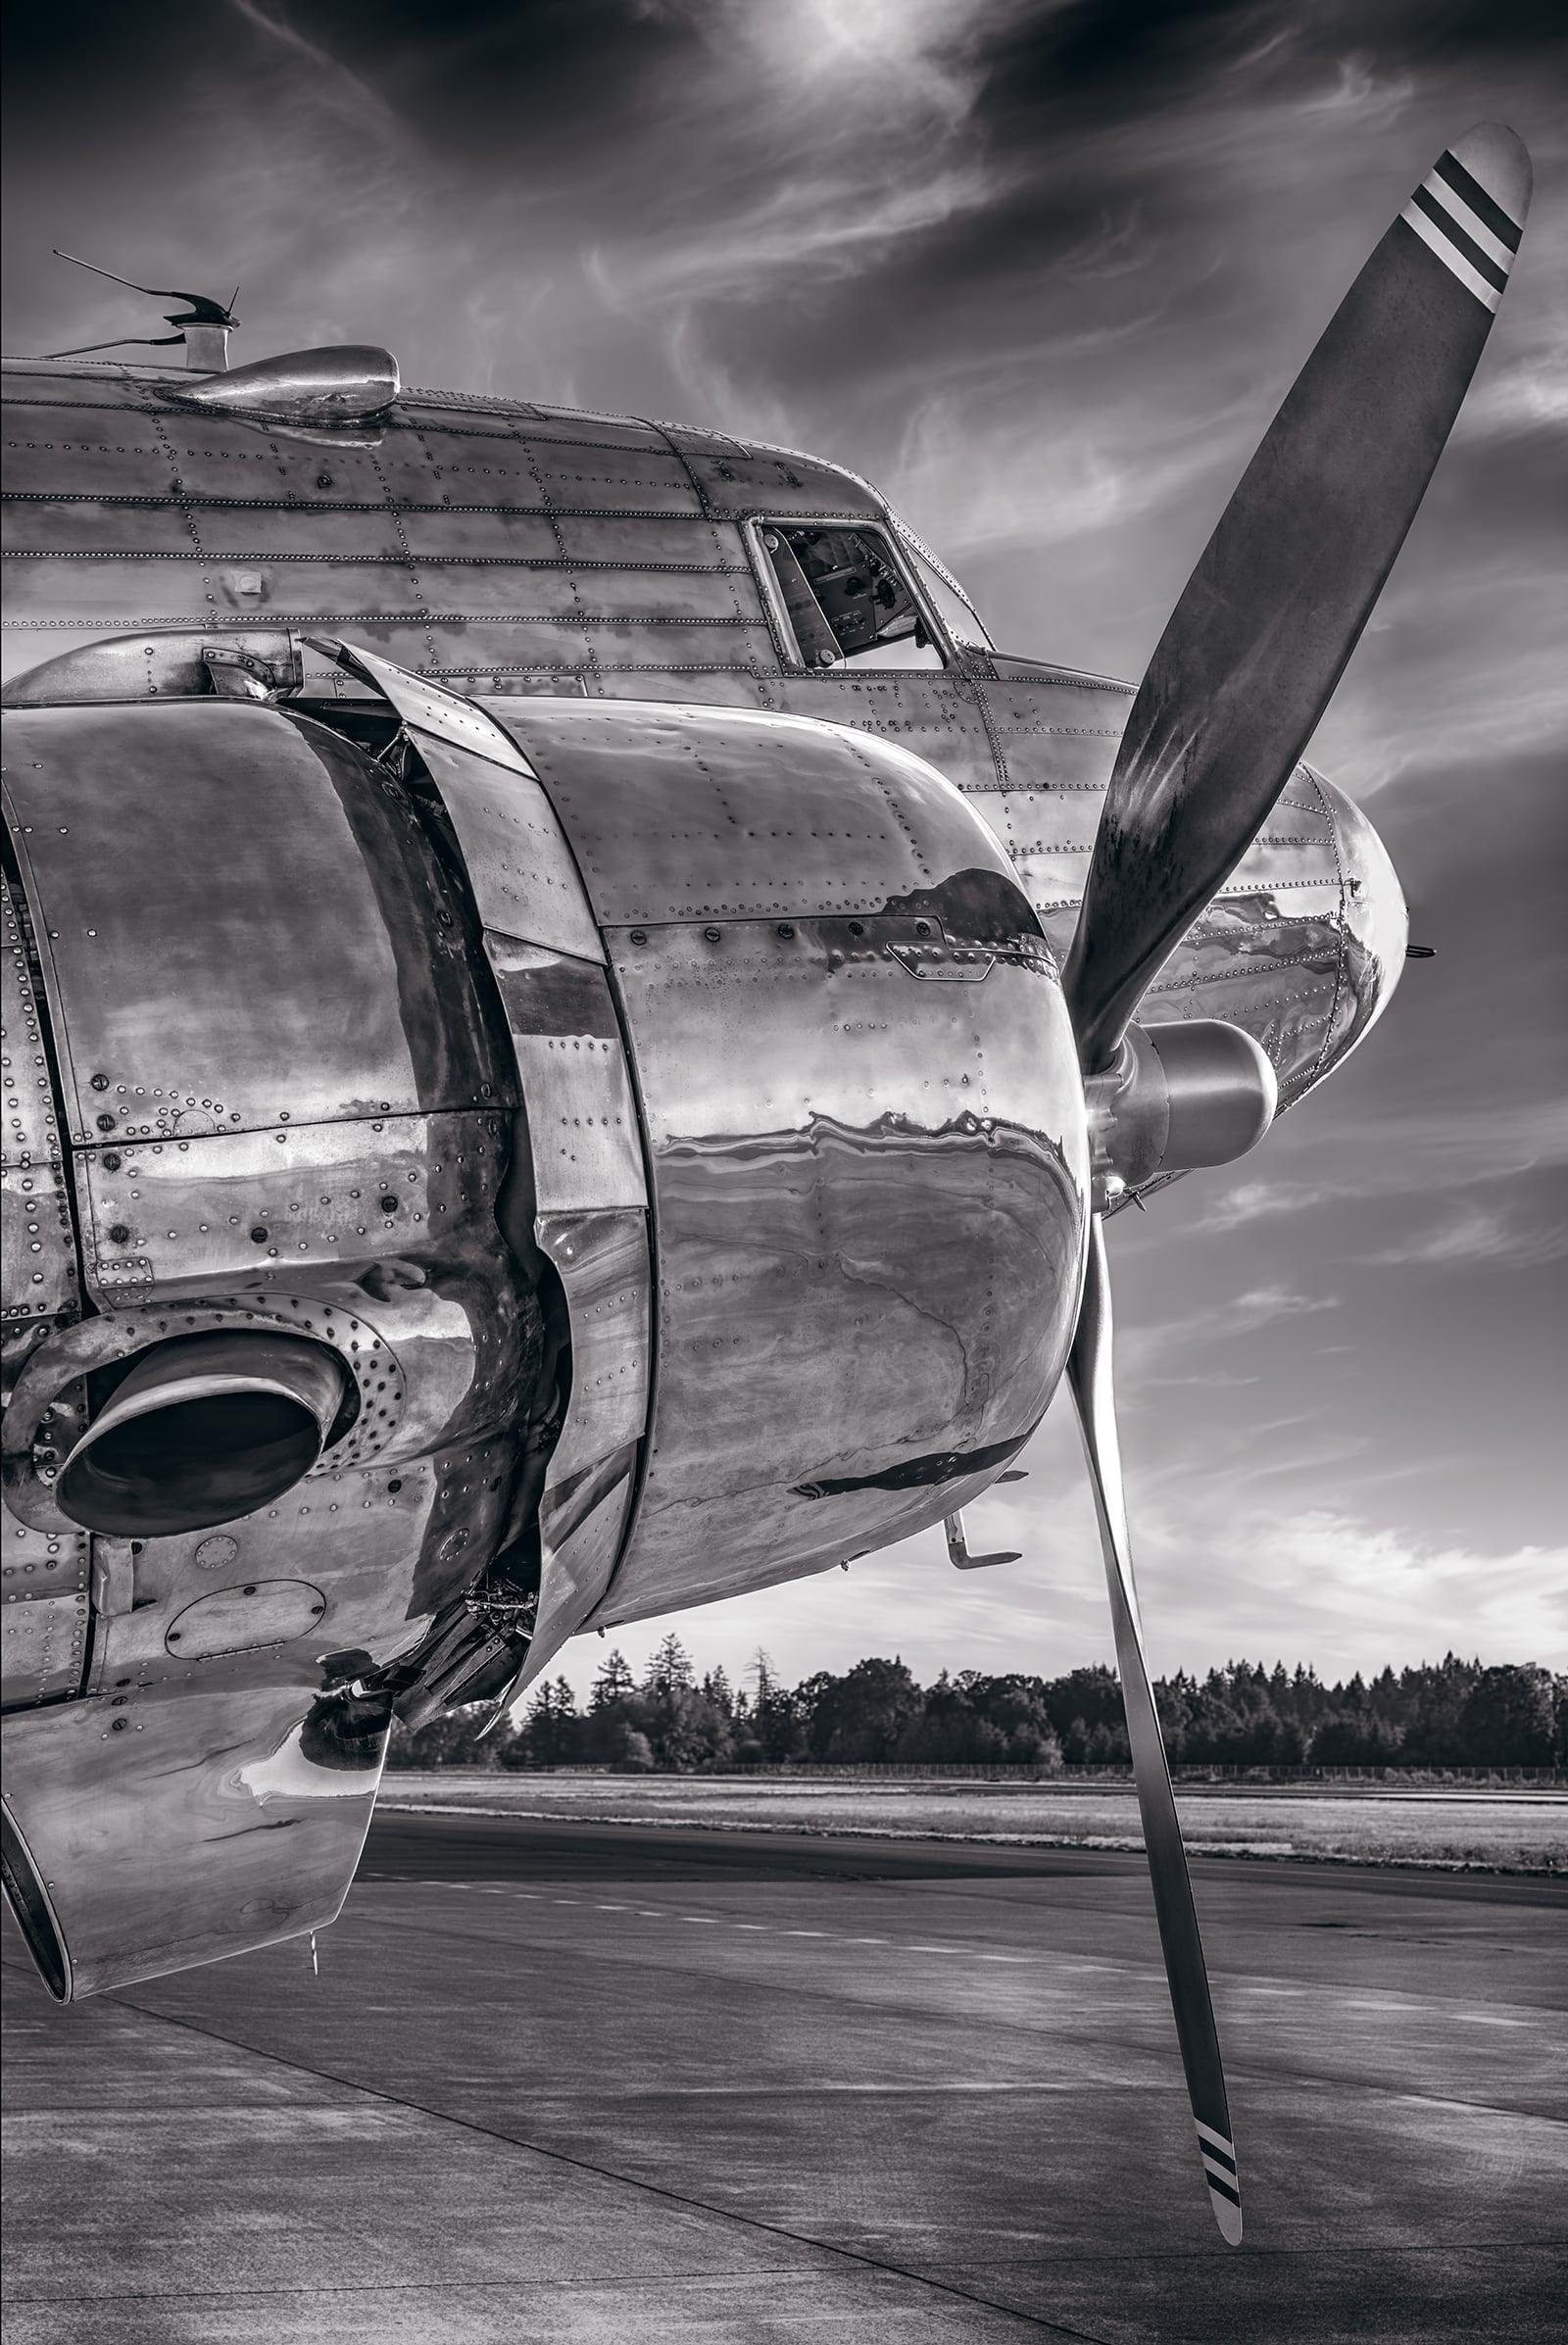 Black and white close up side view of the engine and cockpit of a DC-3 airplane on a runway in Aurora Oregon